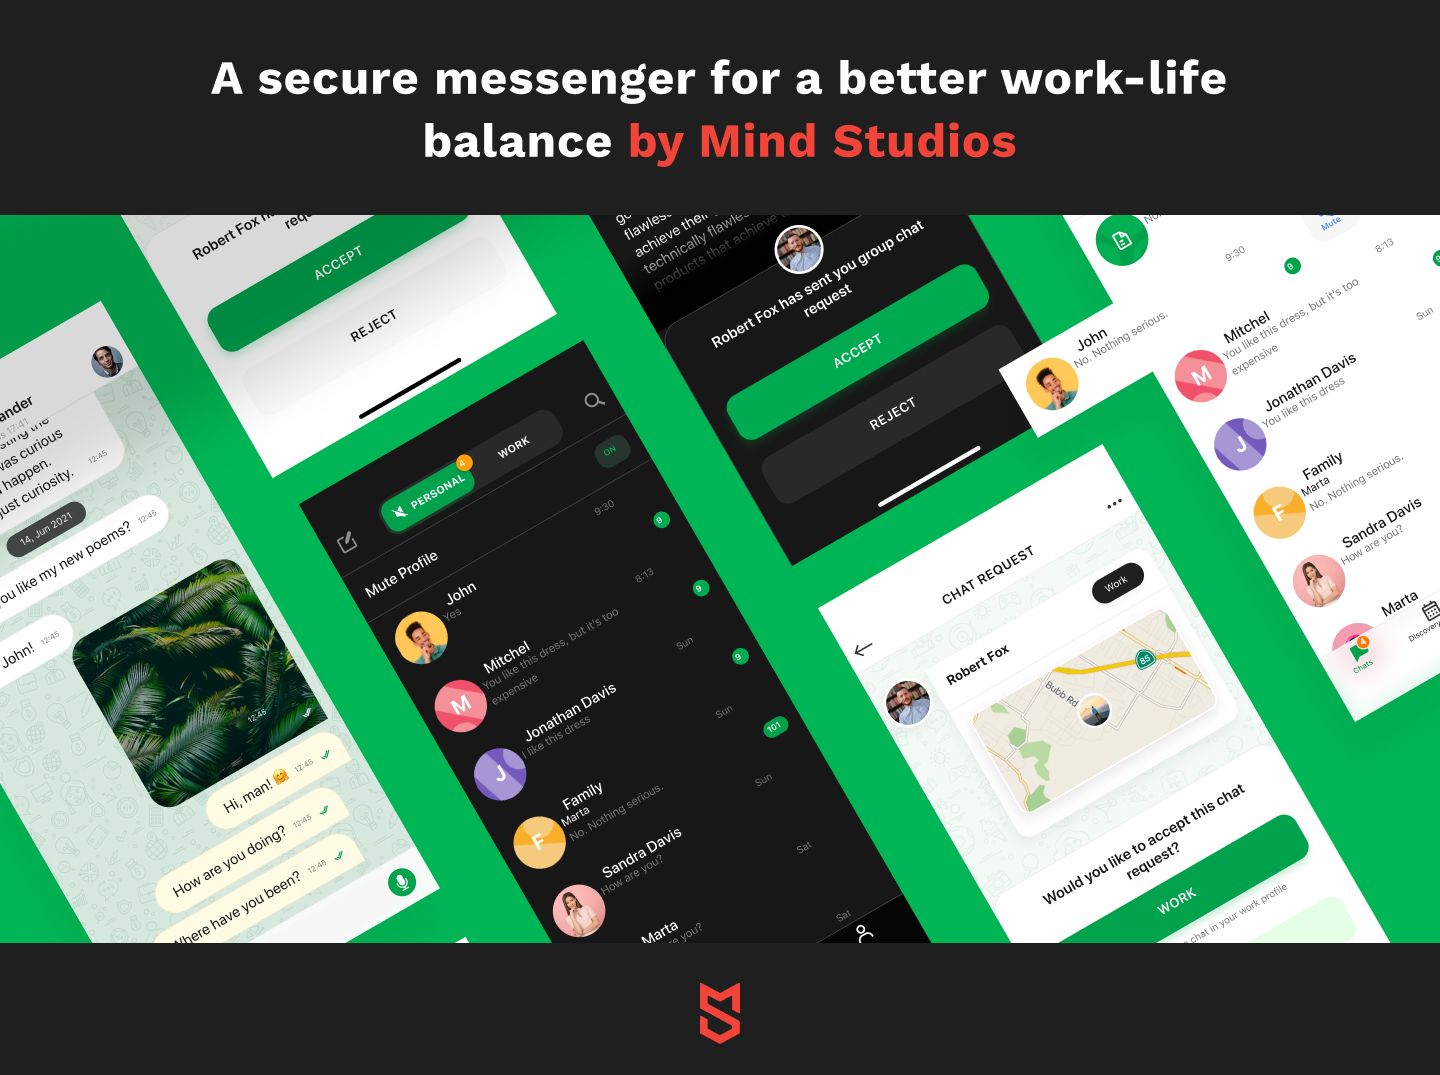 A secure messenger for a better work-life balance by Mind Studios